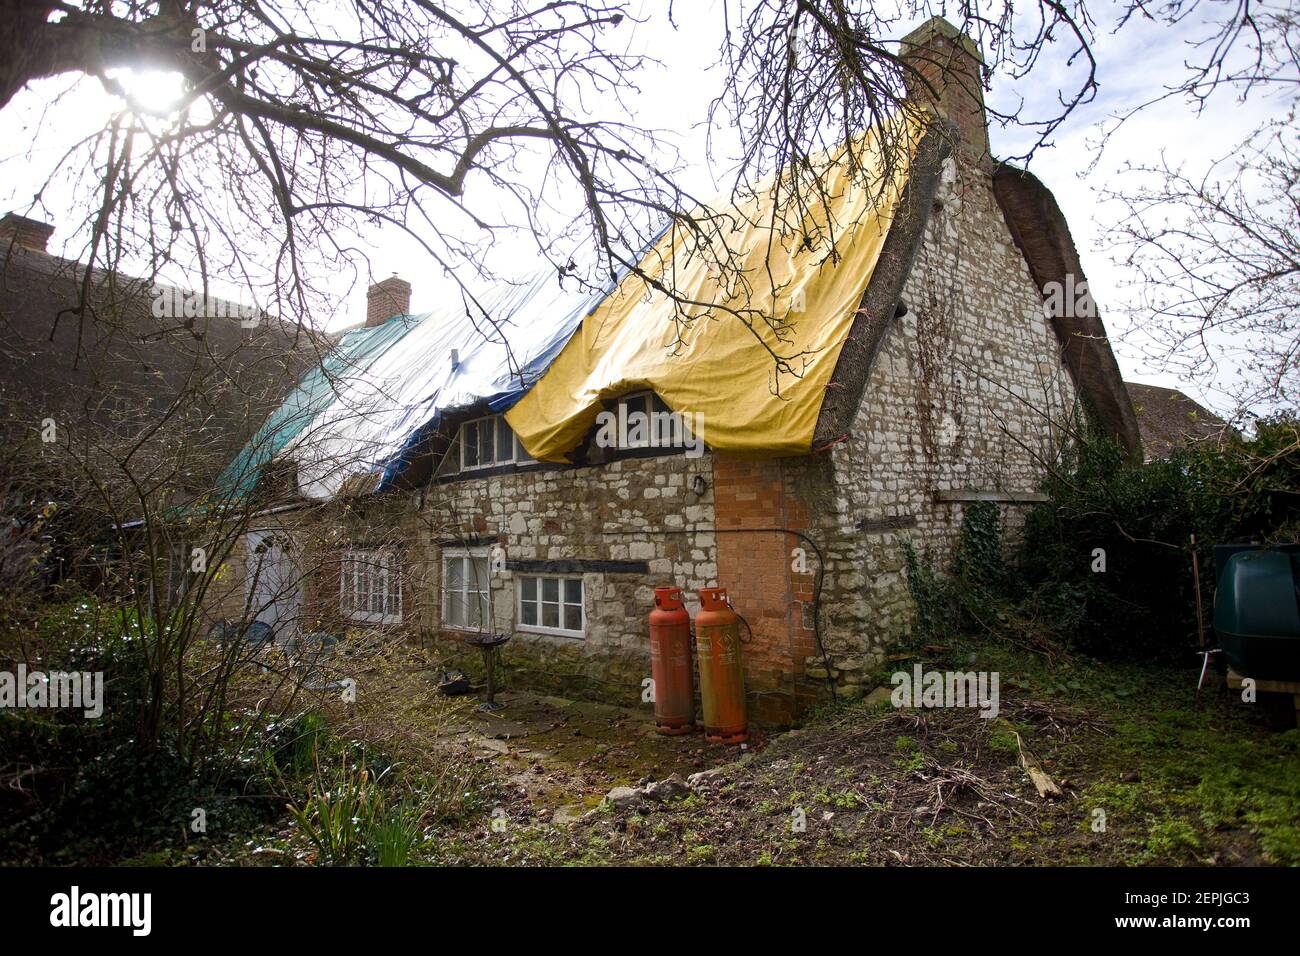 Old chalkstone cottage in need of a new thatch roof, England Stock Photo